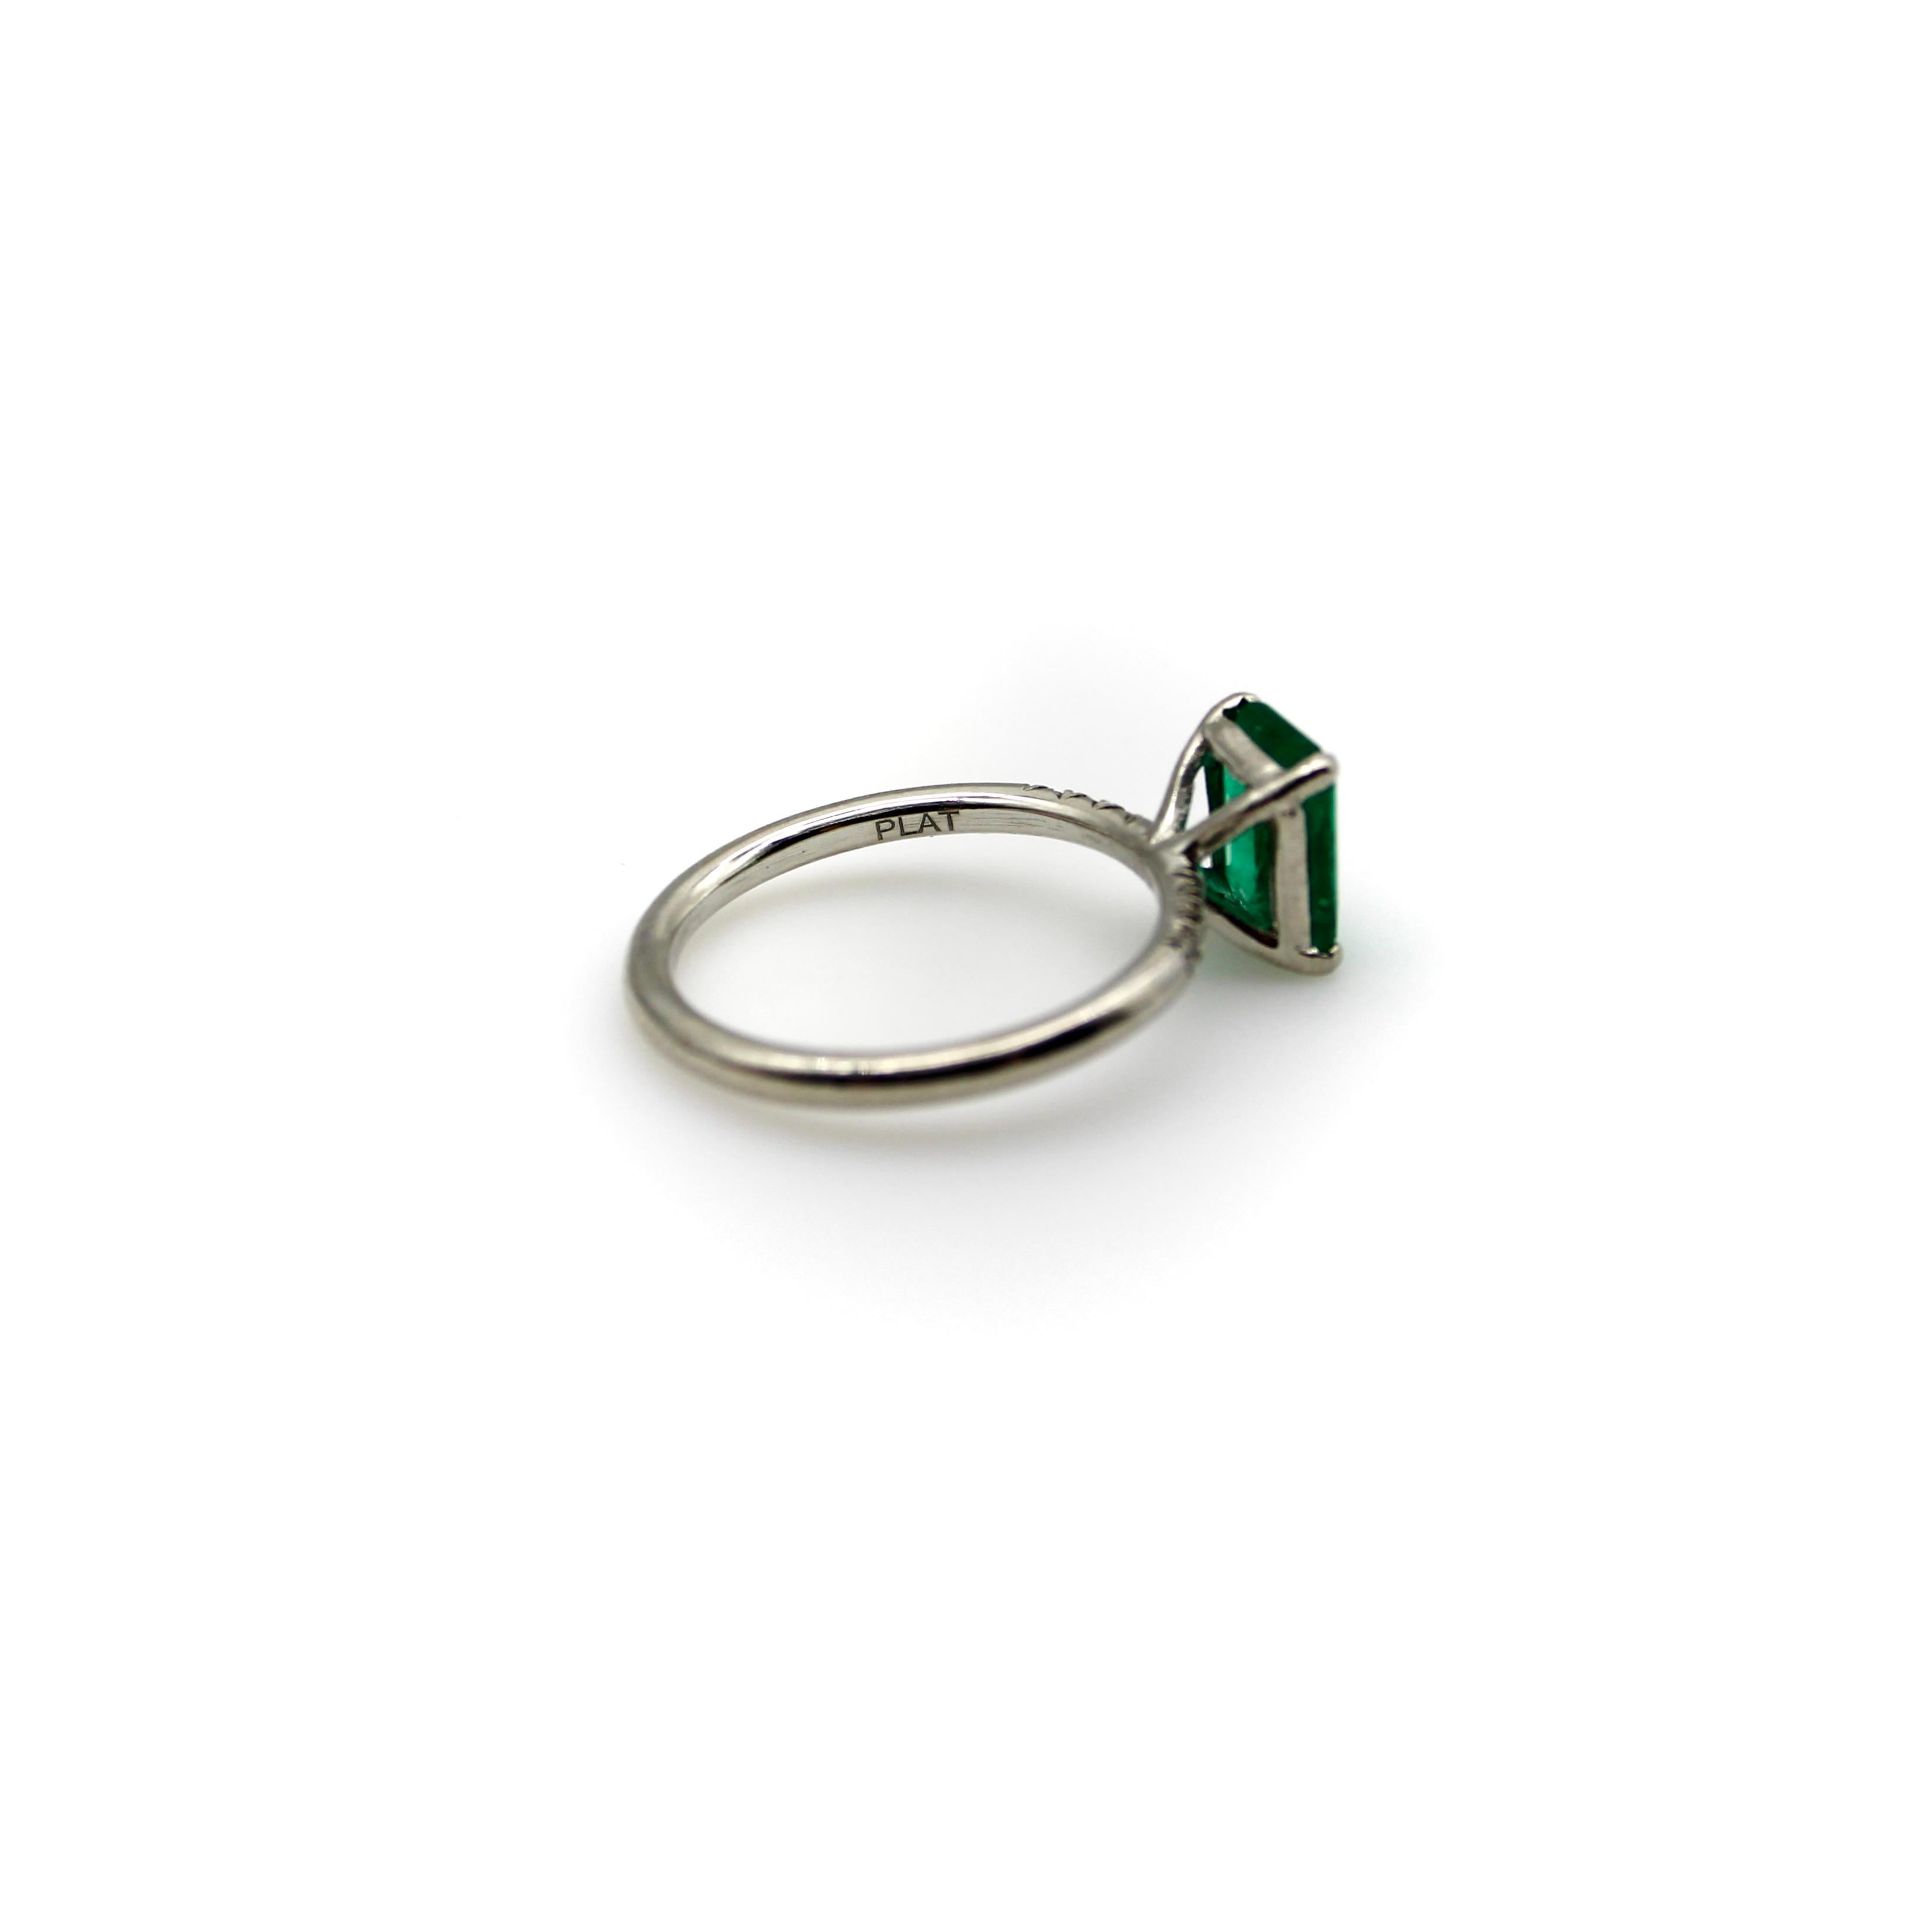 A beautiful rectangular emerald cut emerald is prong set into a platinum band, embellished with six single cut diamonds that add sparkle to the sides of the ring. The stunning natural emerald is 1.4 carats, well saturated and clear, making for a